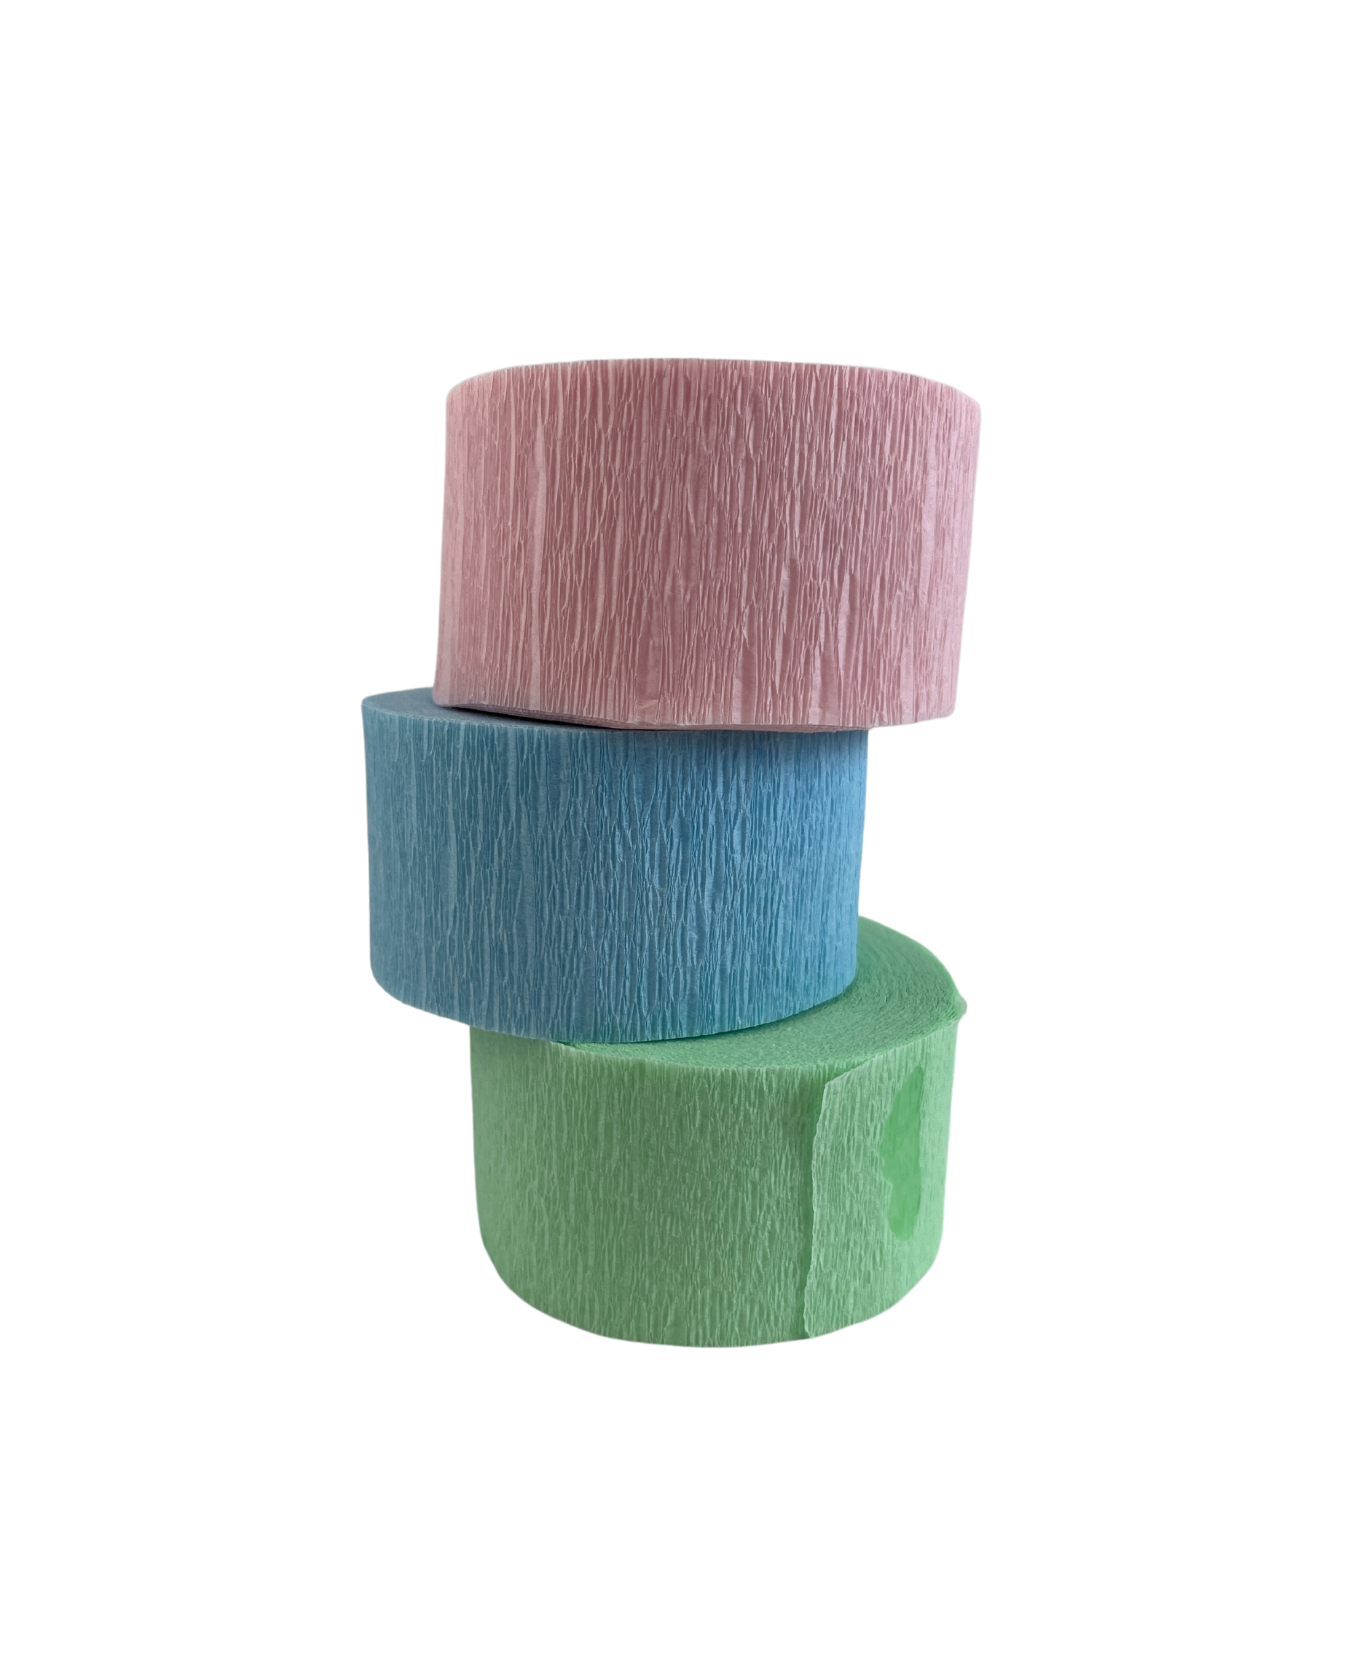 Green, Blue, and Pink Paper Crepe Streamers